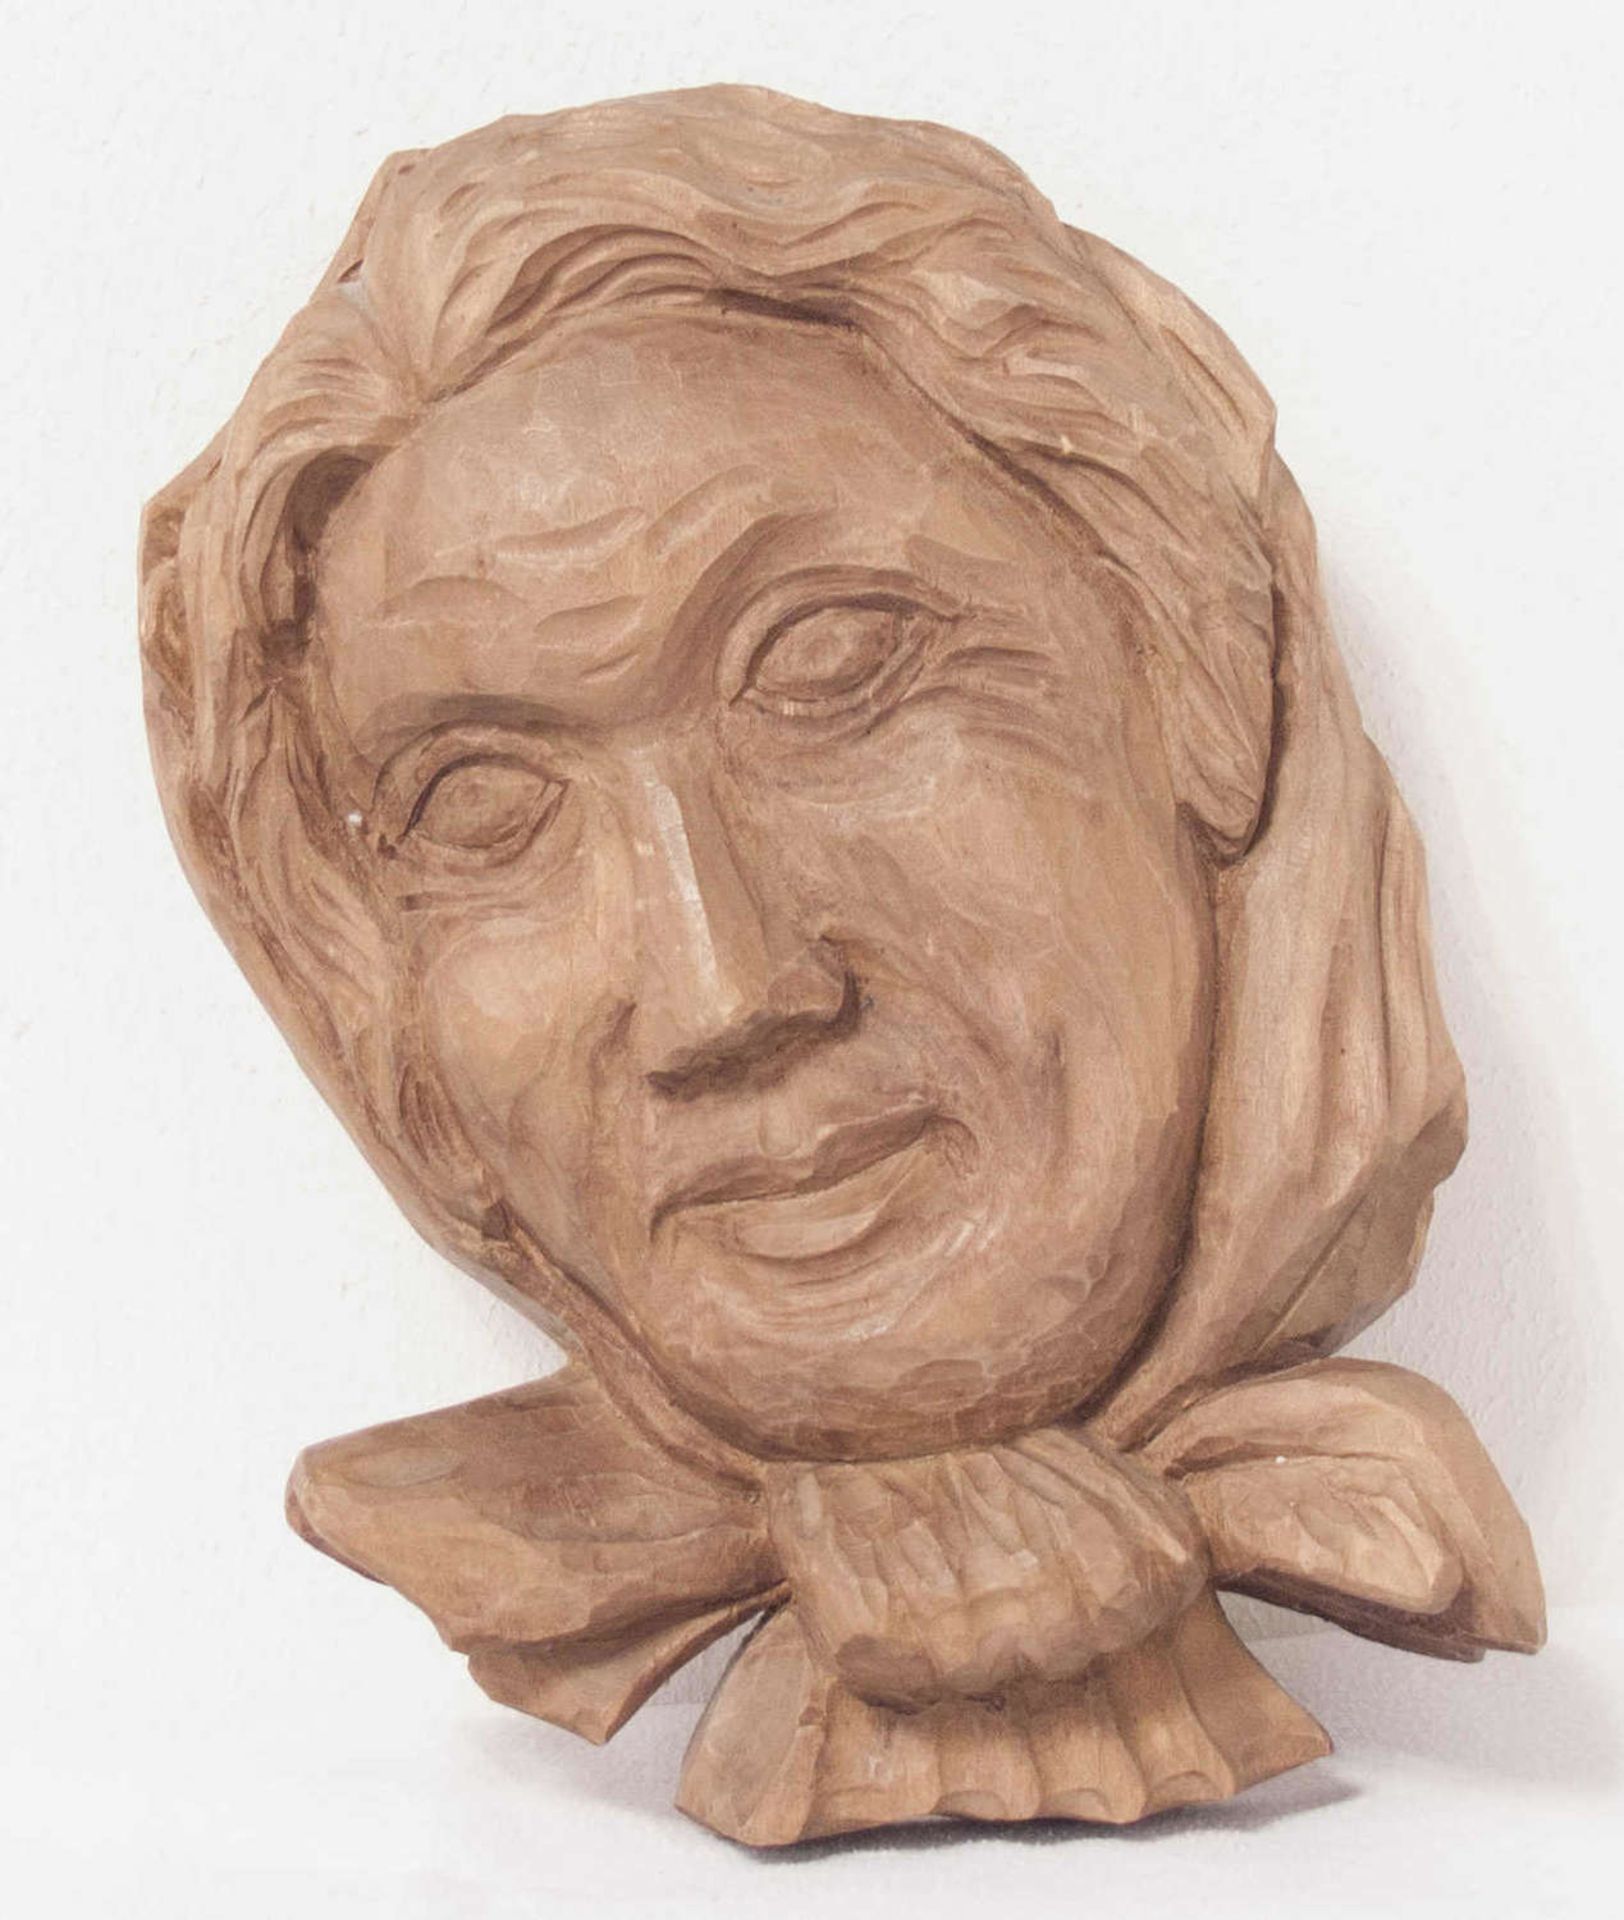 Holz - Figur "Frauenkopf", geschnitzt. H: ca. 30 cm.Wood figure "Woman's head", carved. H: about